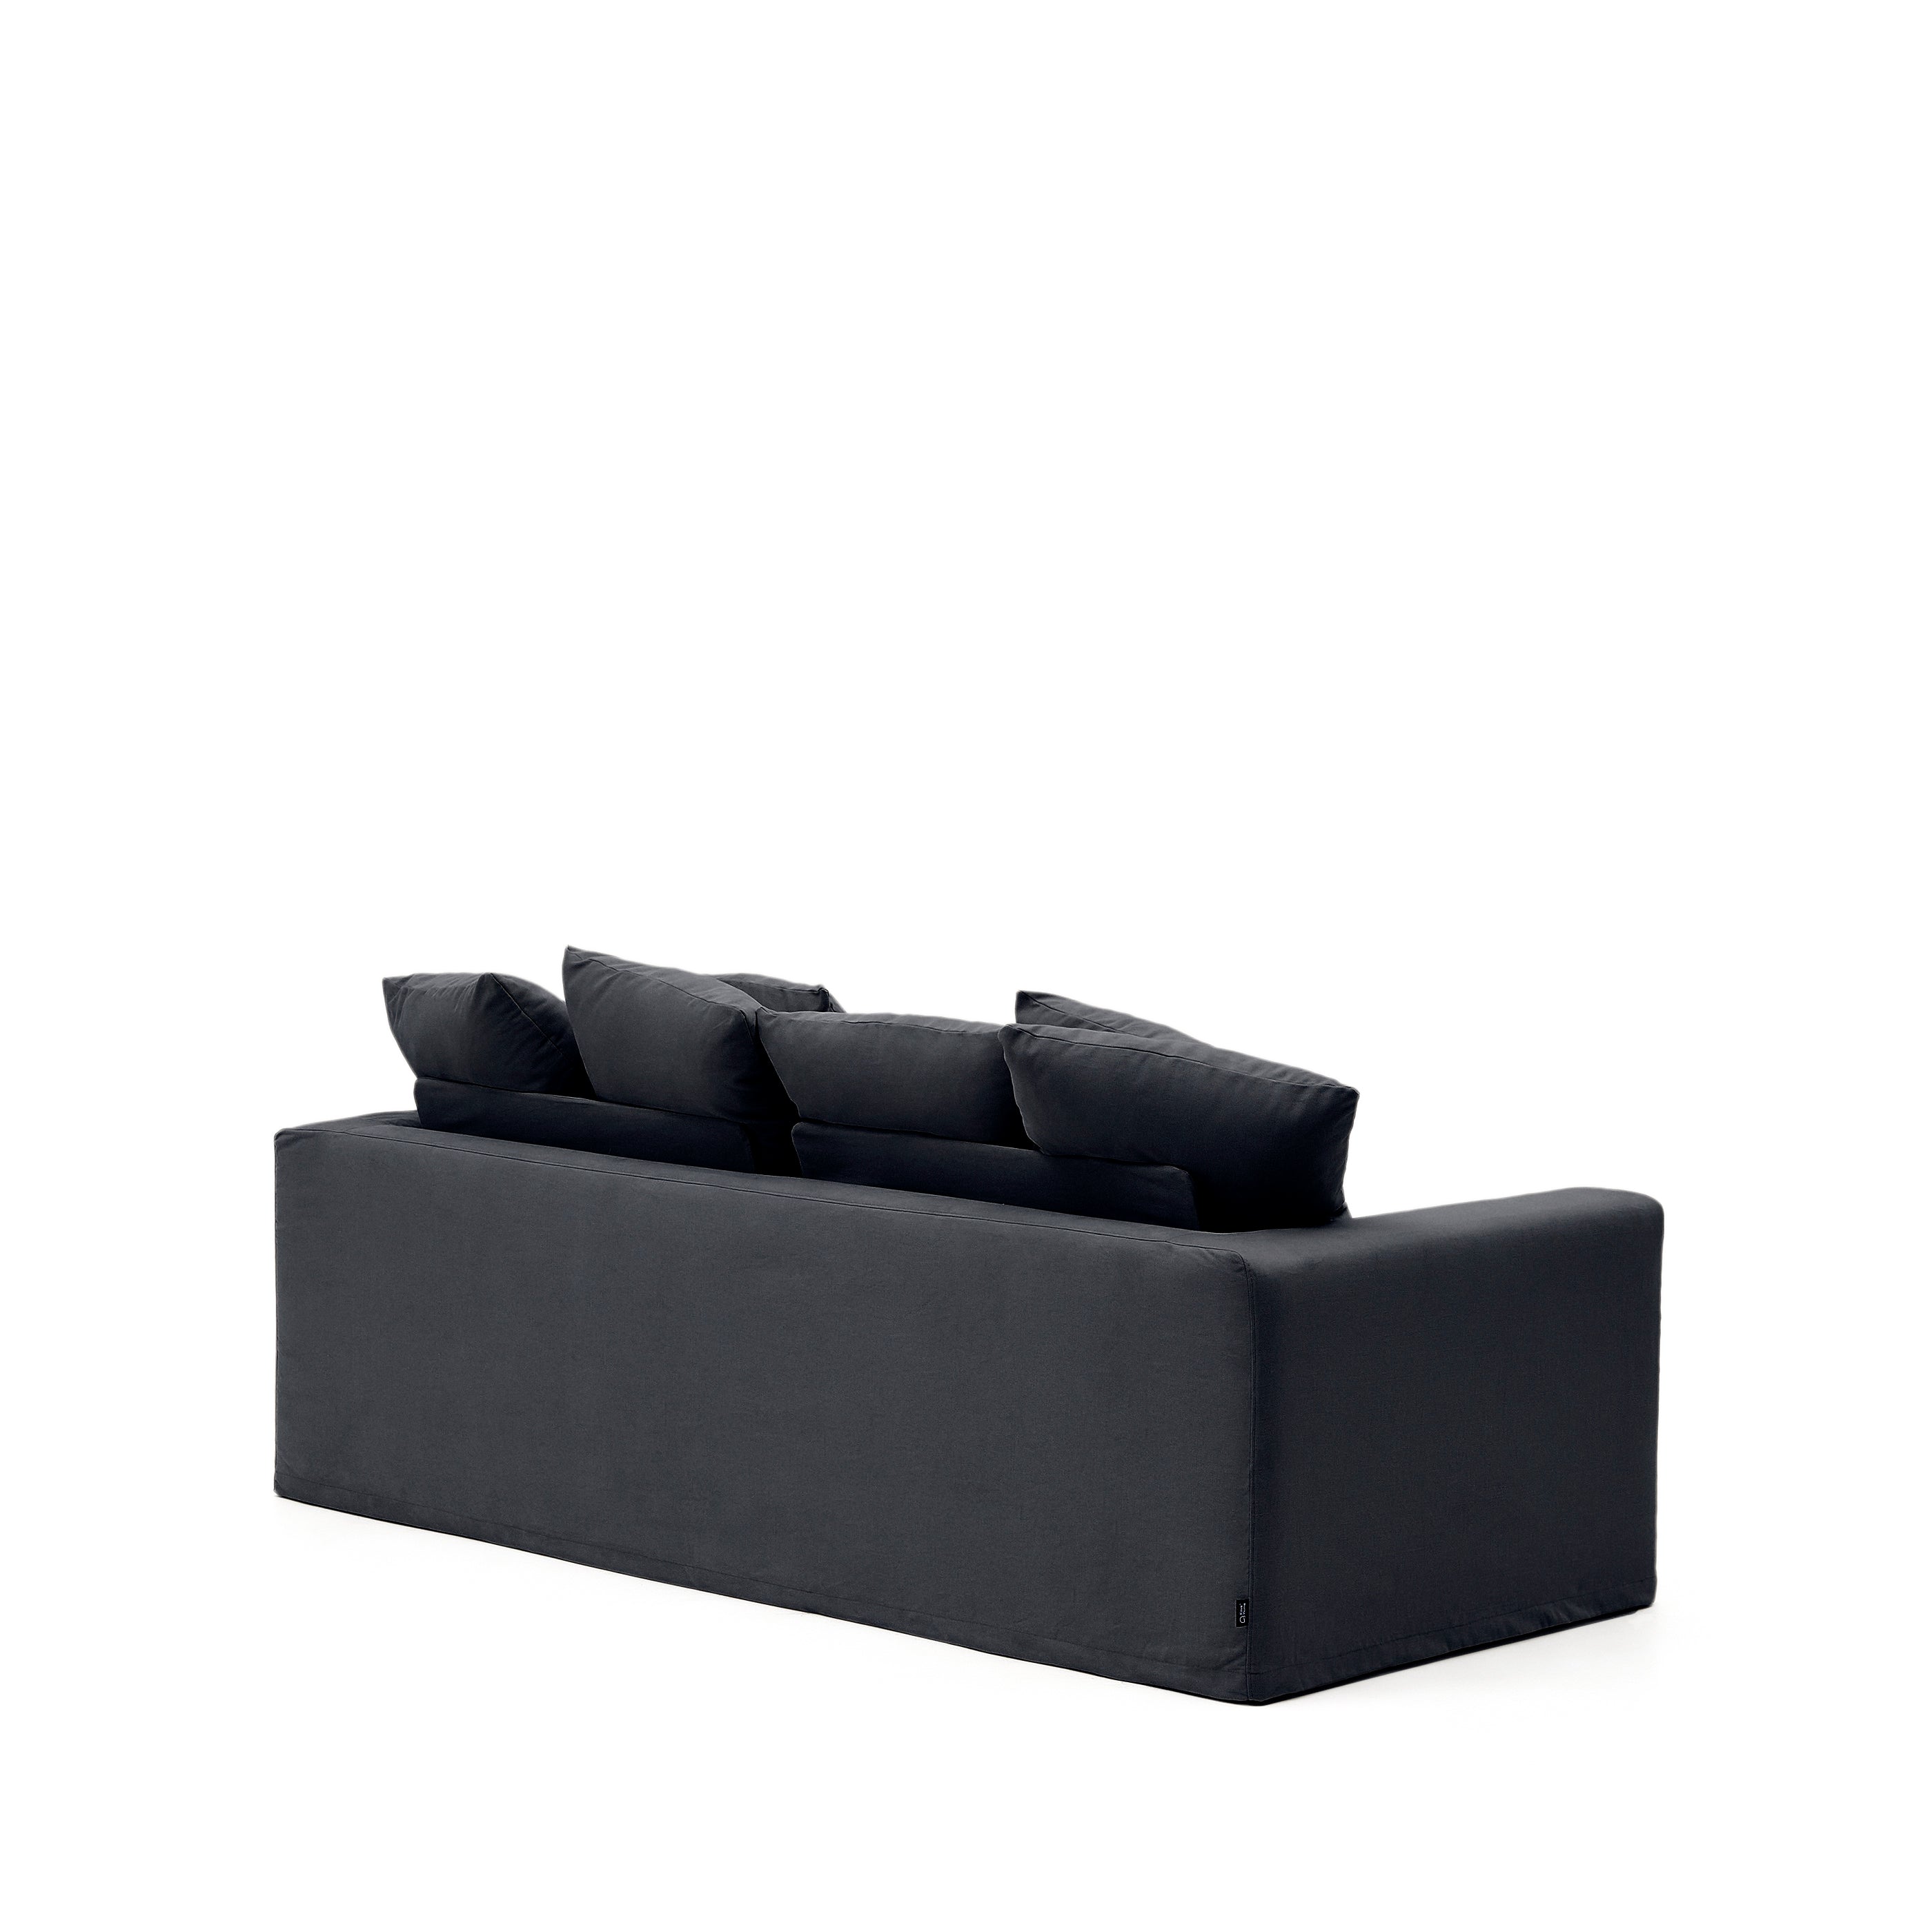 Nora three-seater sofa with removable cover and anthracite gray linen and cotton cushions, 240 cm